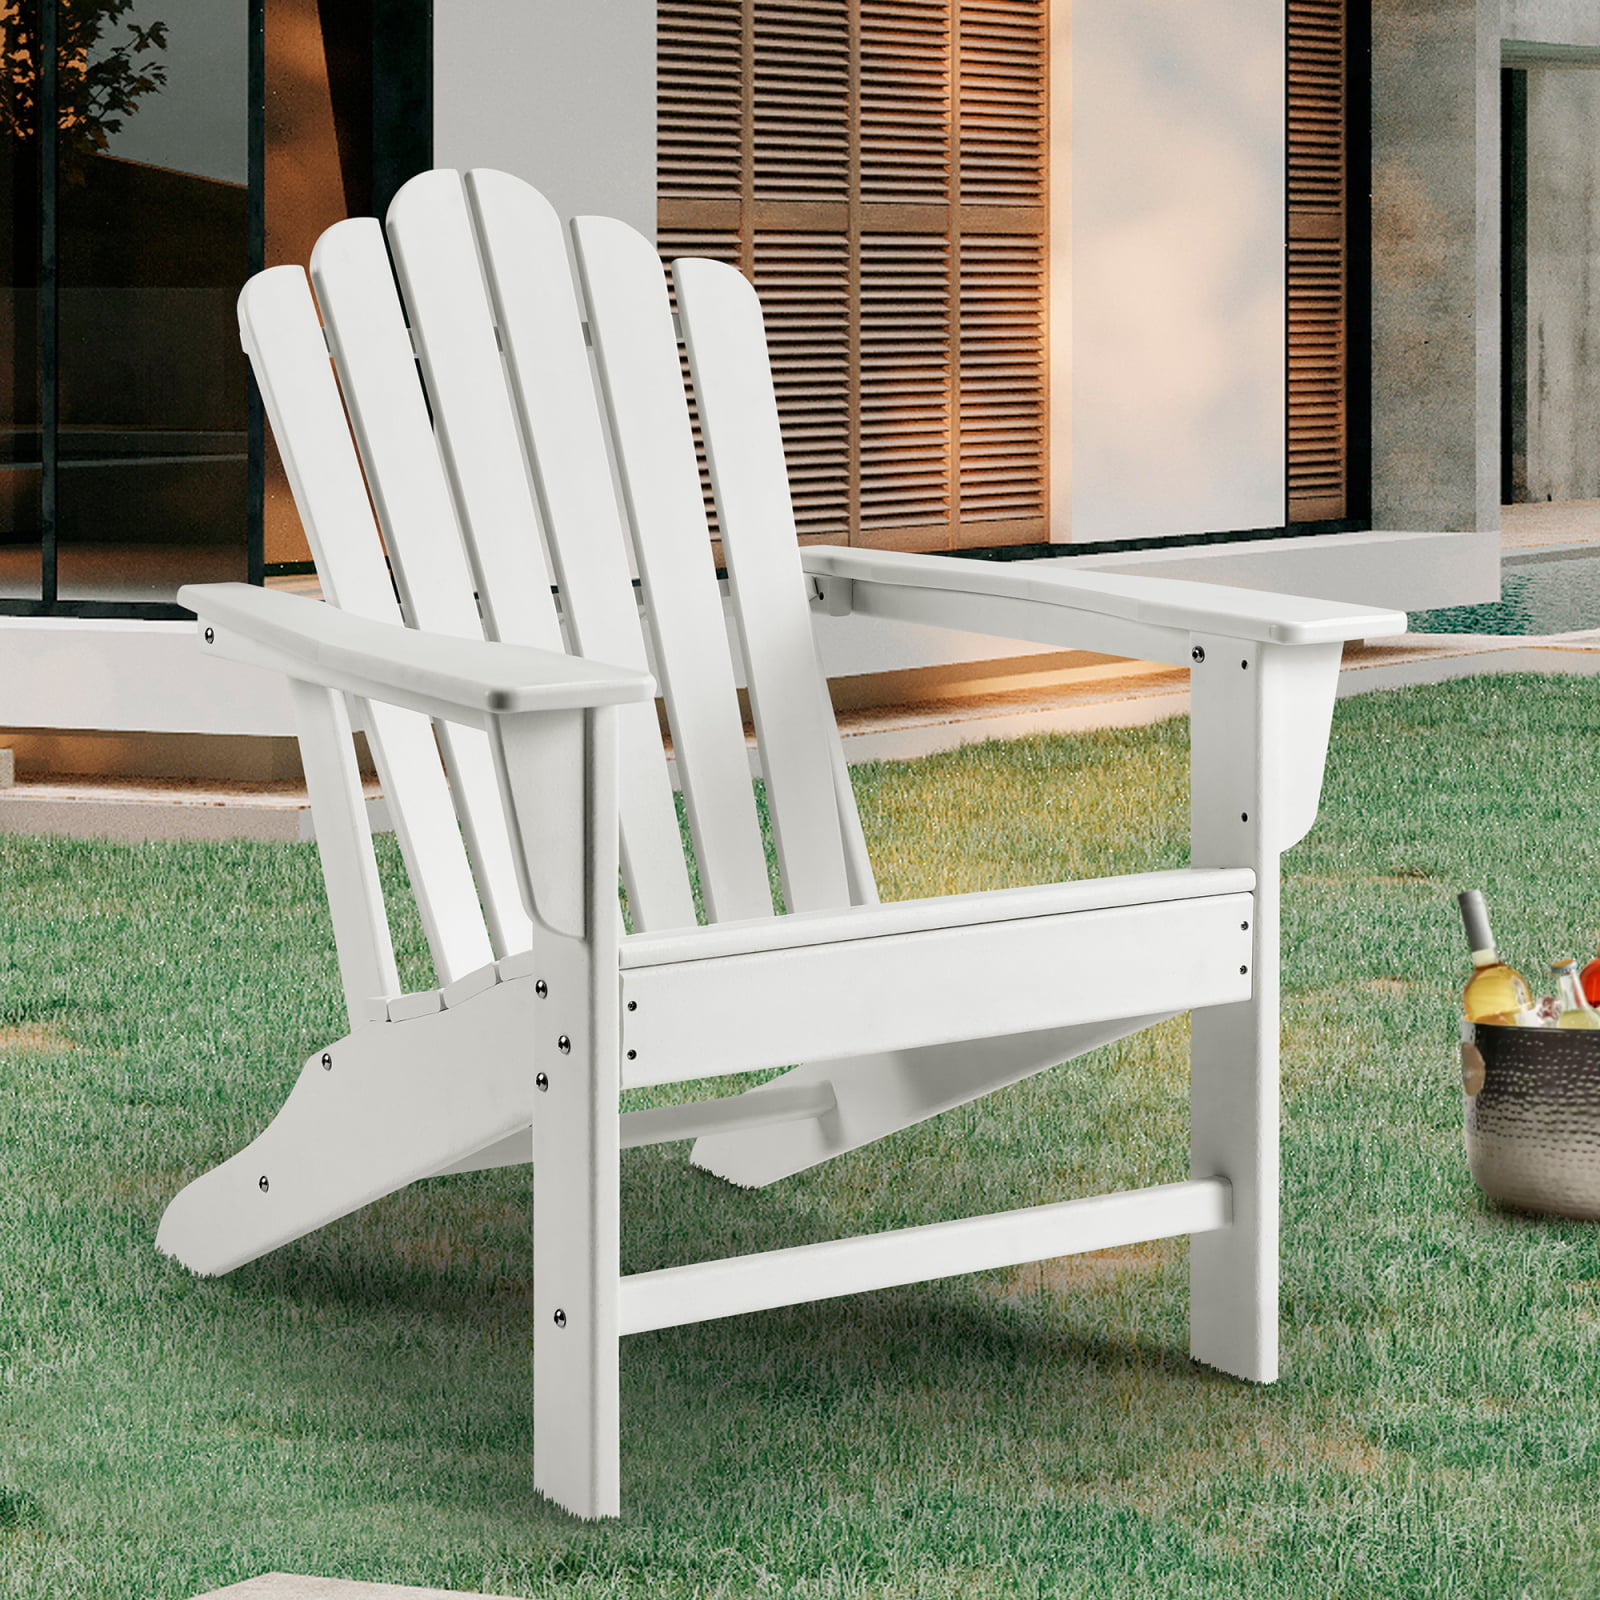 Red Ehomexpert Classic Outdoor Adirondack Chair for Garden Porch Patio Deck Backyard Weather Resistant Accent Furniture